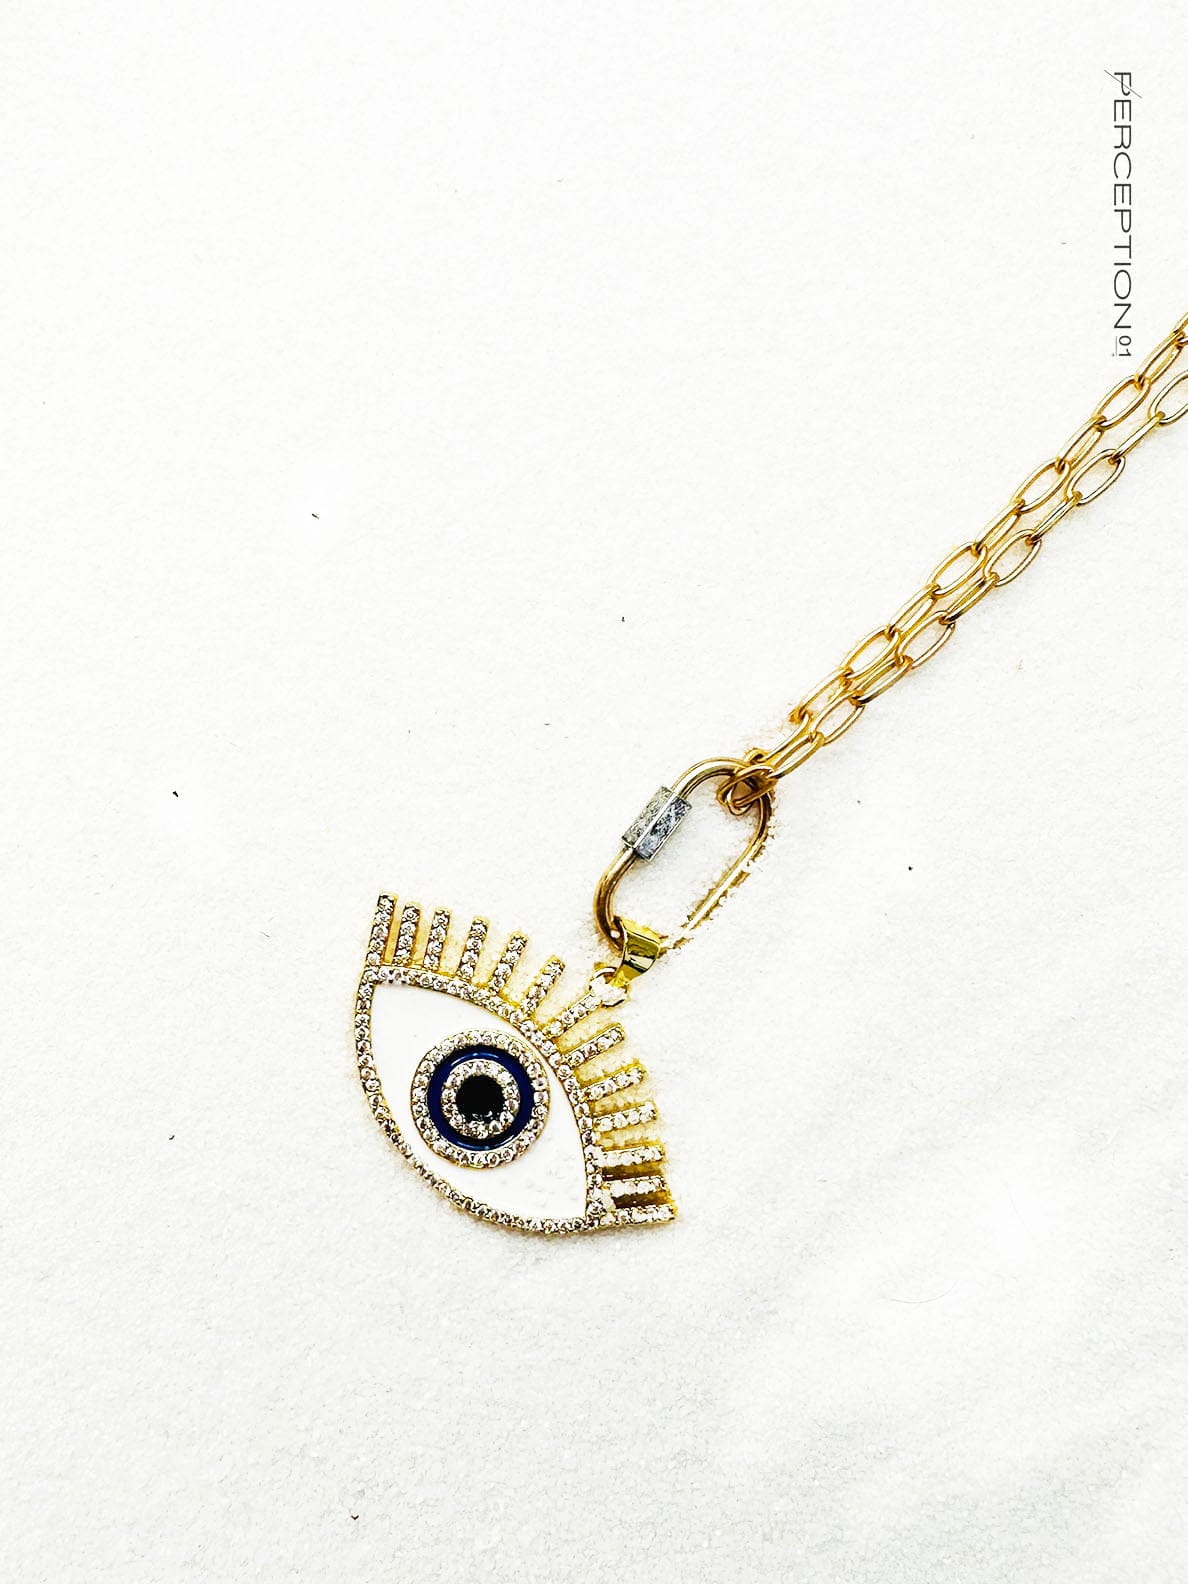 Protective Eye Charm Necklace - Gold flat link - Perception0one.com